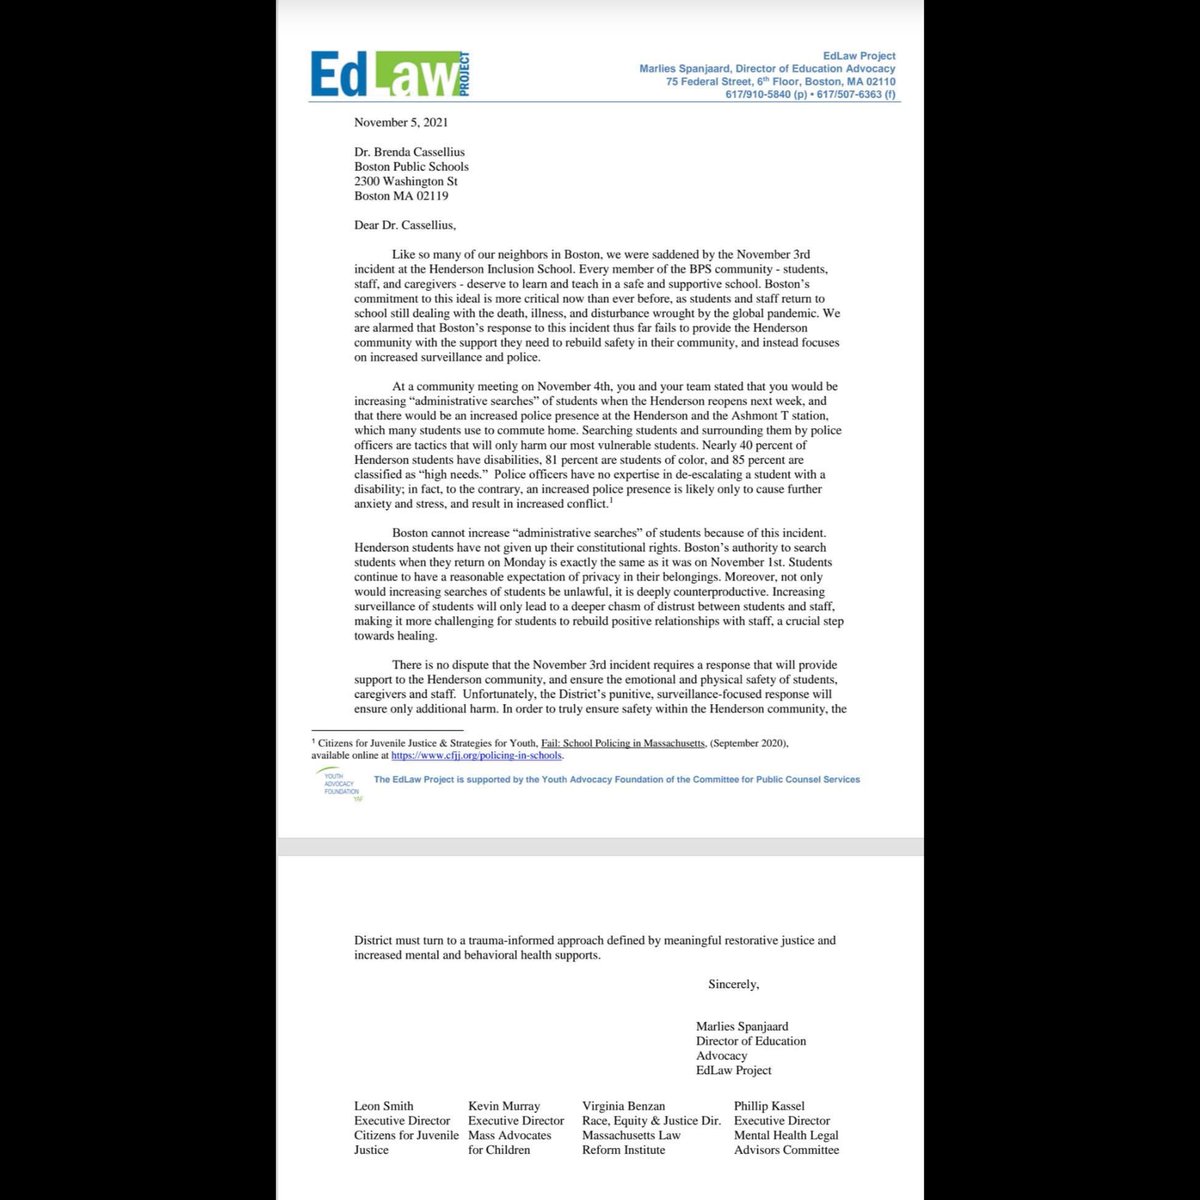 Youth Advocacy Foundation on X: EdLaw Project joined with other legal  advocacy organizations yesterday to write to Boston Public Schools  Superintendent to urge a trauma-informed approach instead of the increased  searches &police